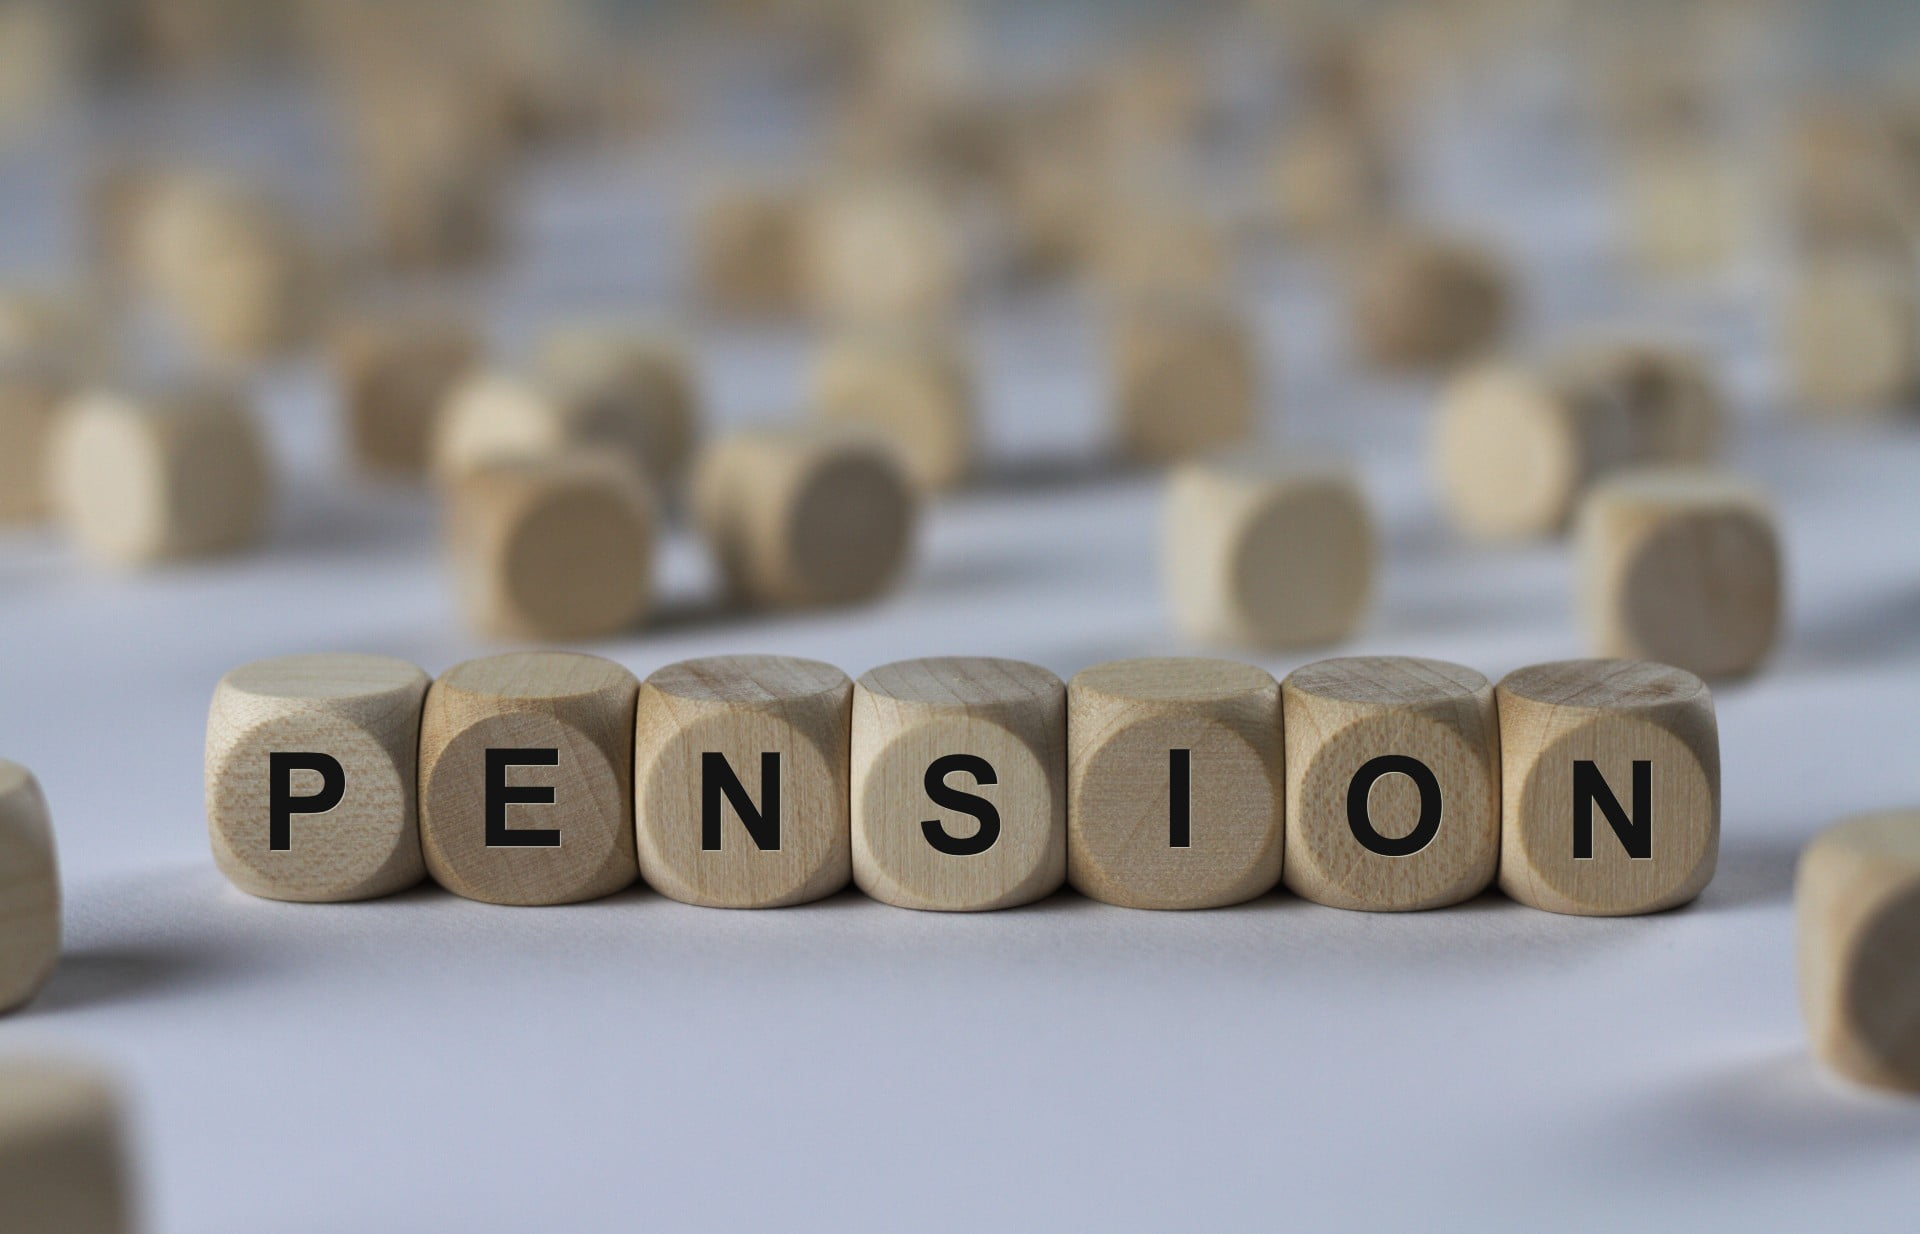 Pension myth versus pension fact: breaking down common pension misconceptions